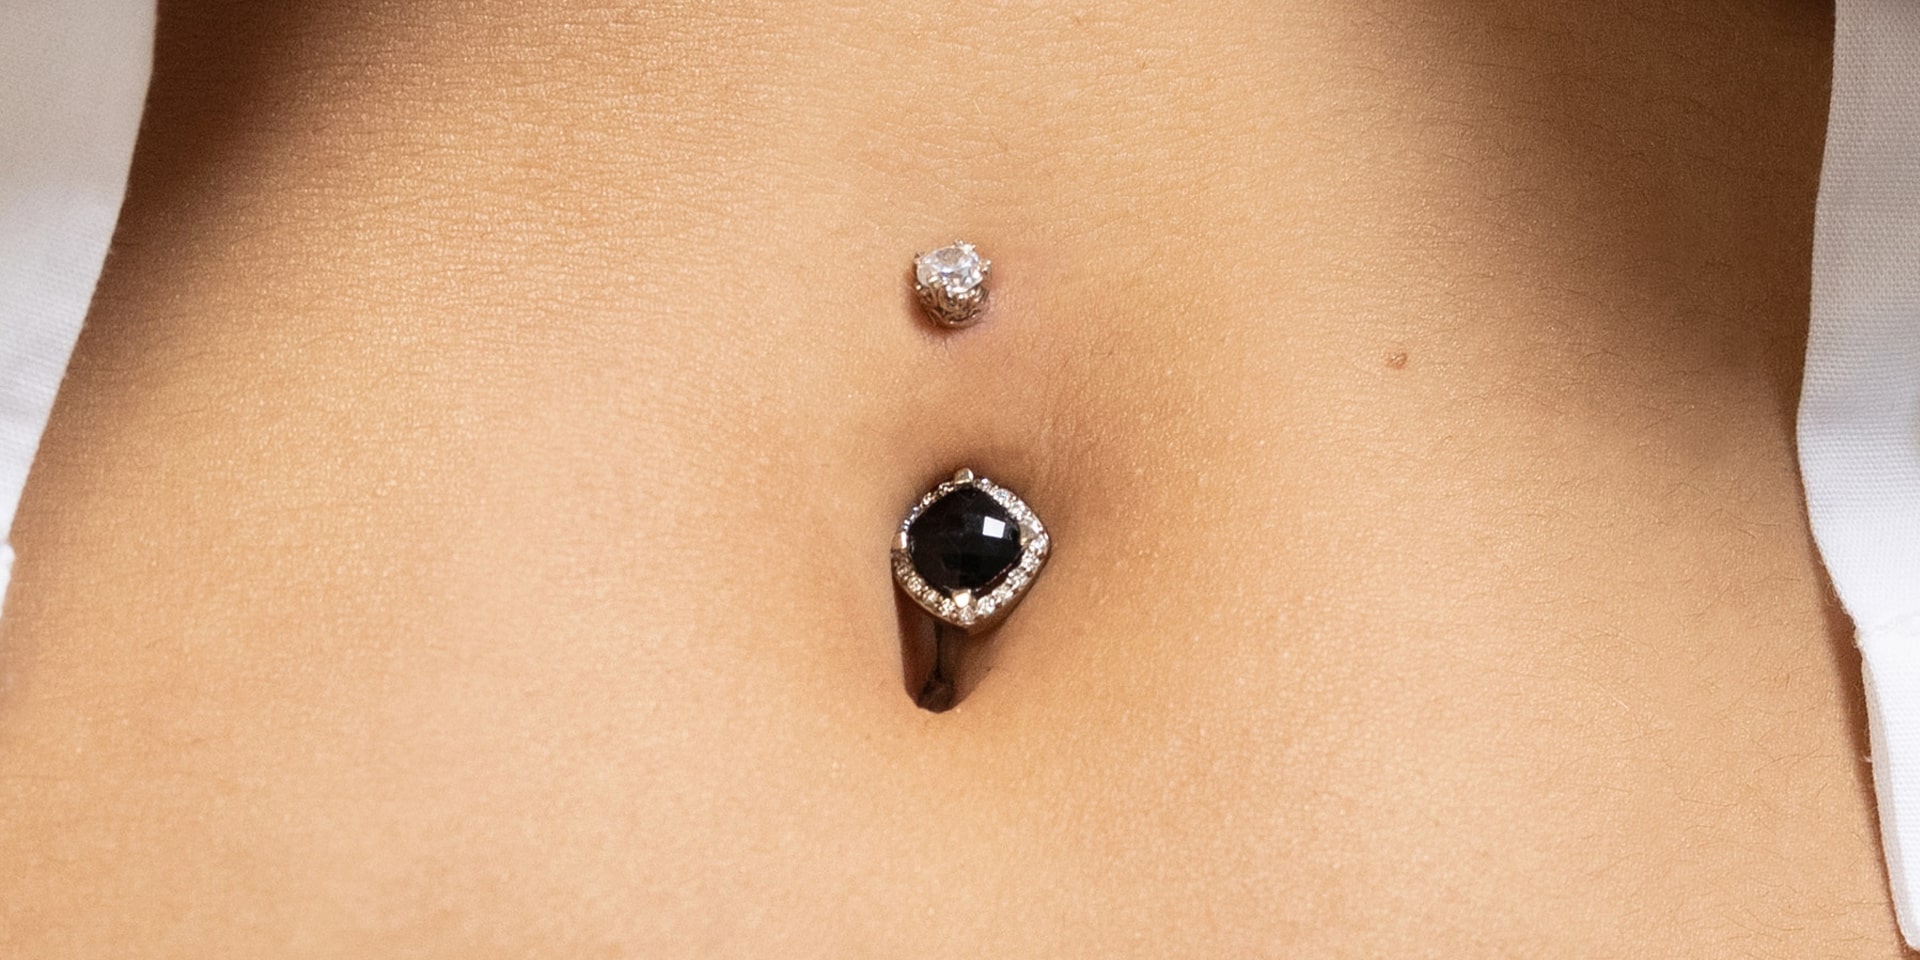 ben pyke recommends pics of belly button piercings pic